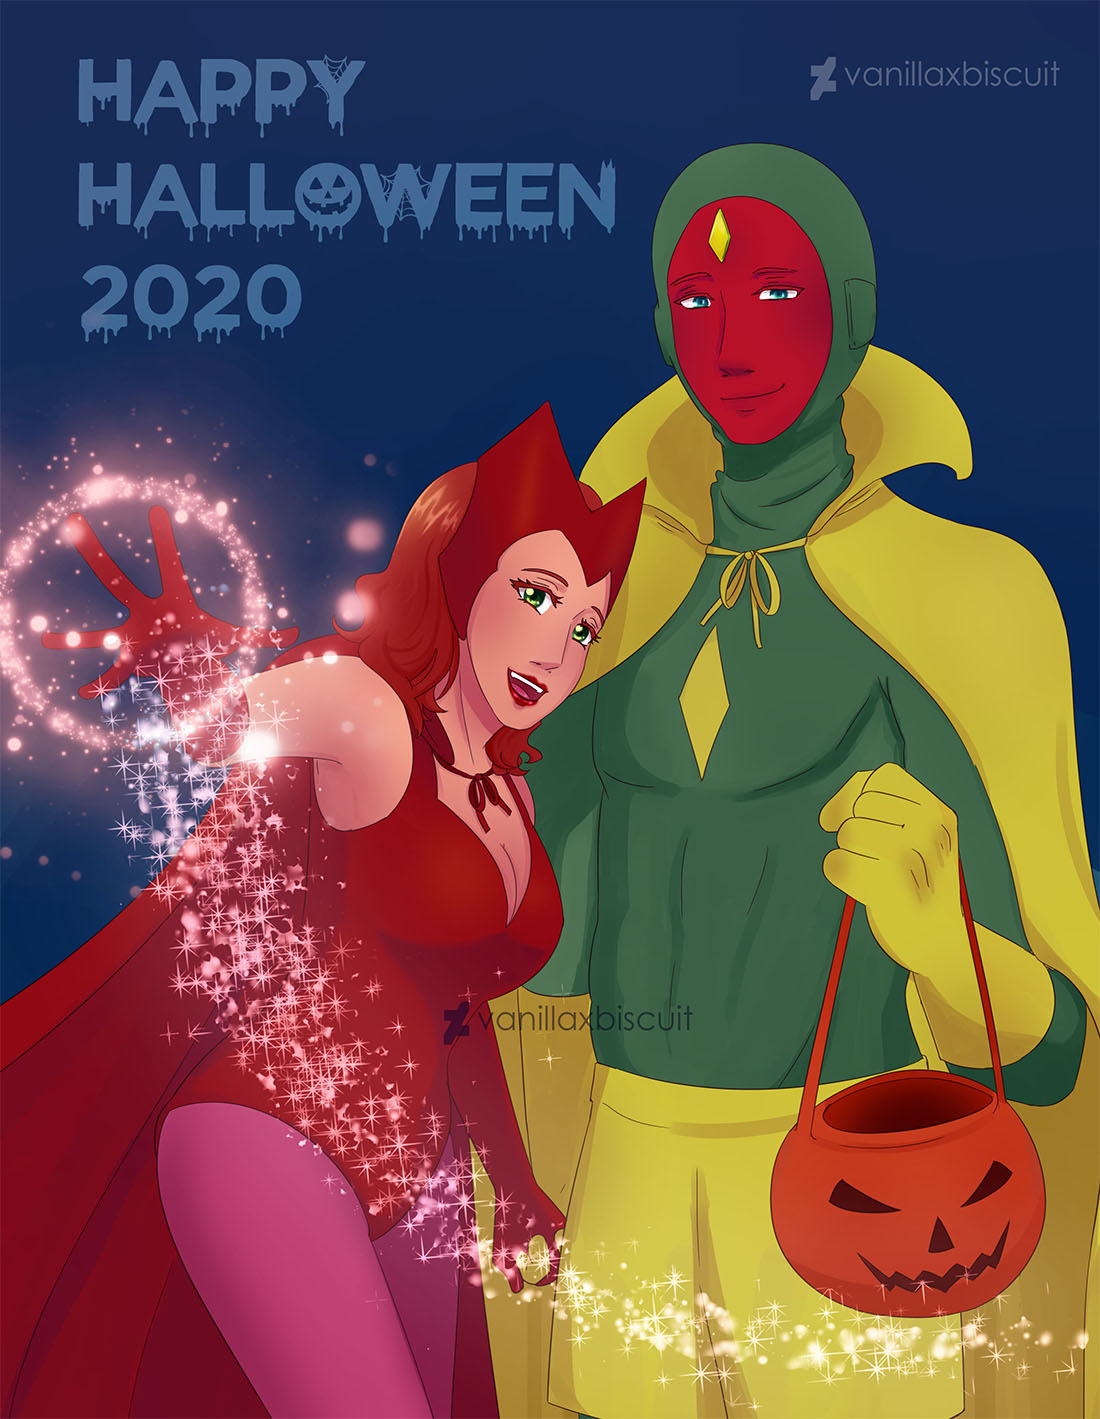 Scarlet Witch & Vision VS Halloween